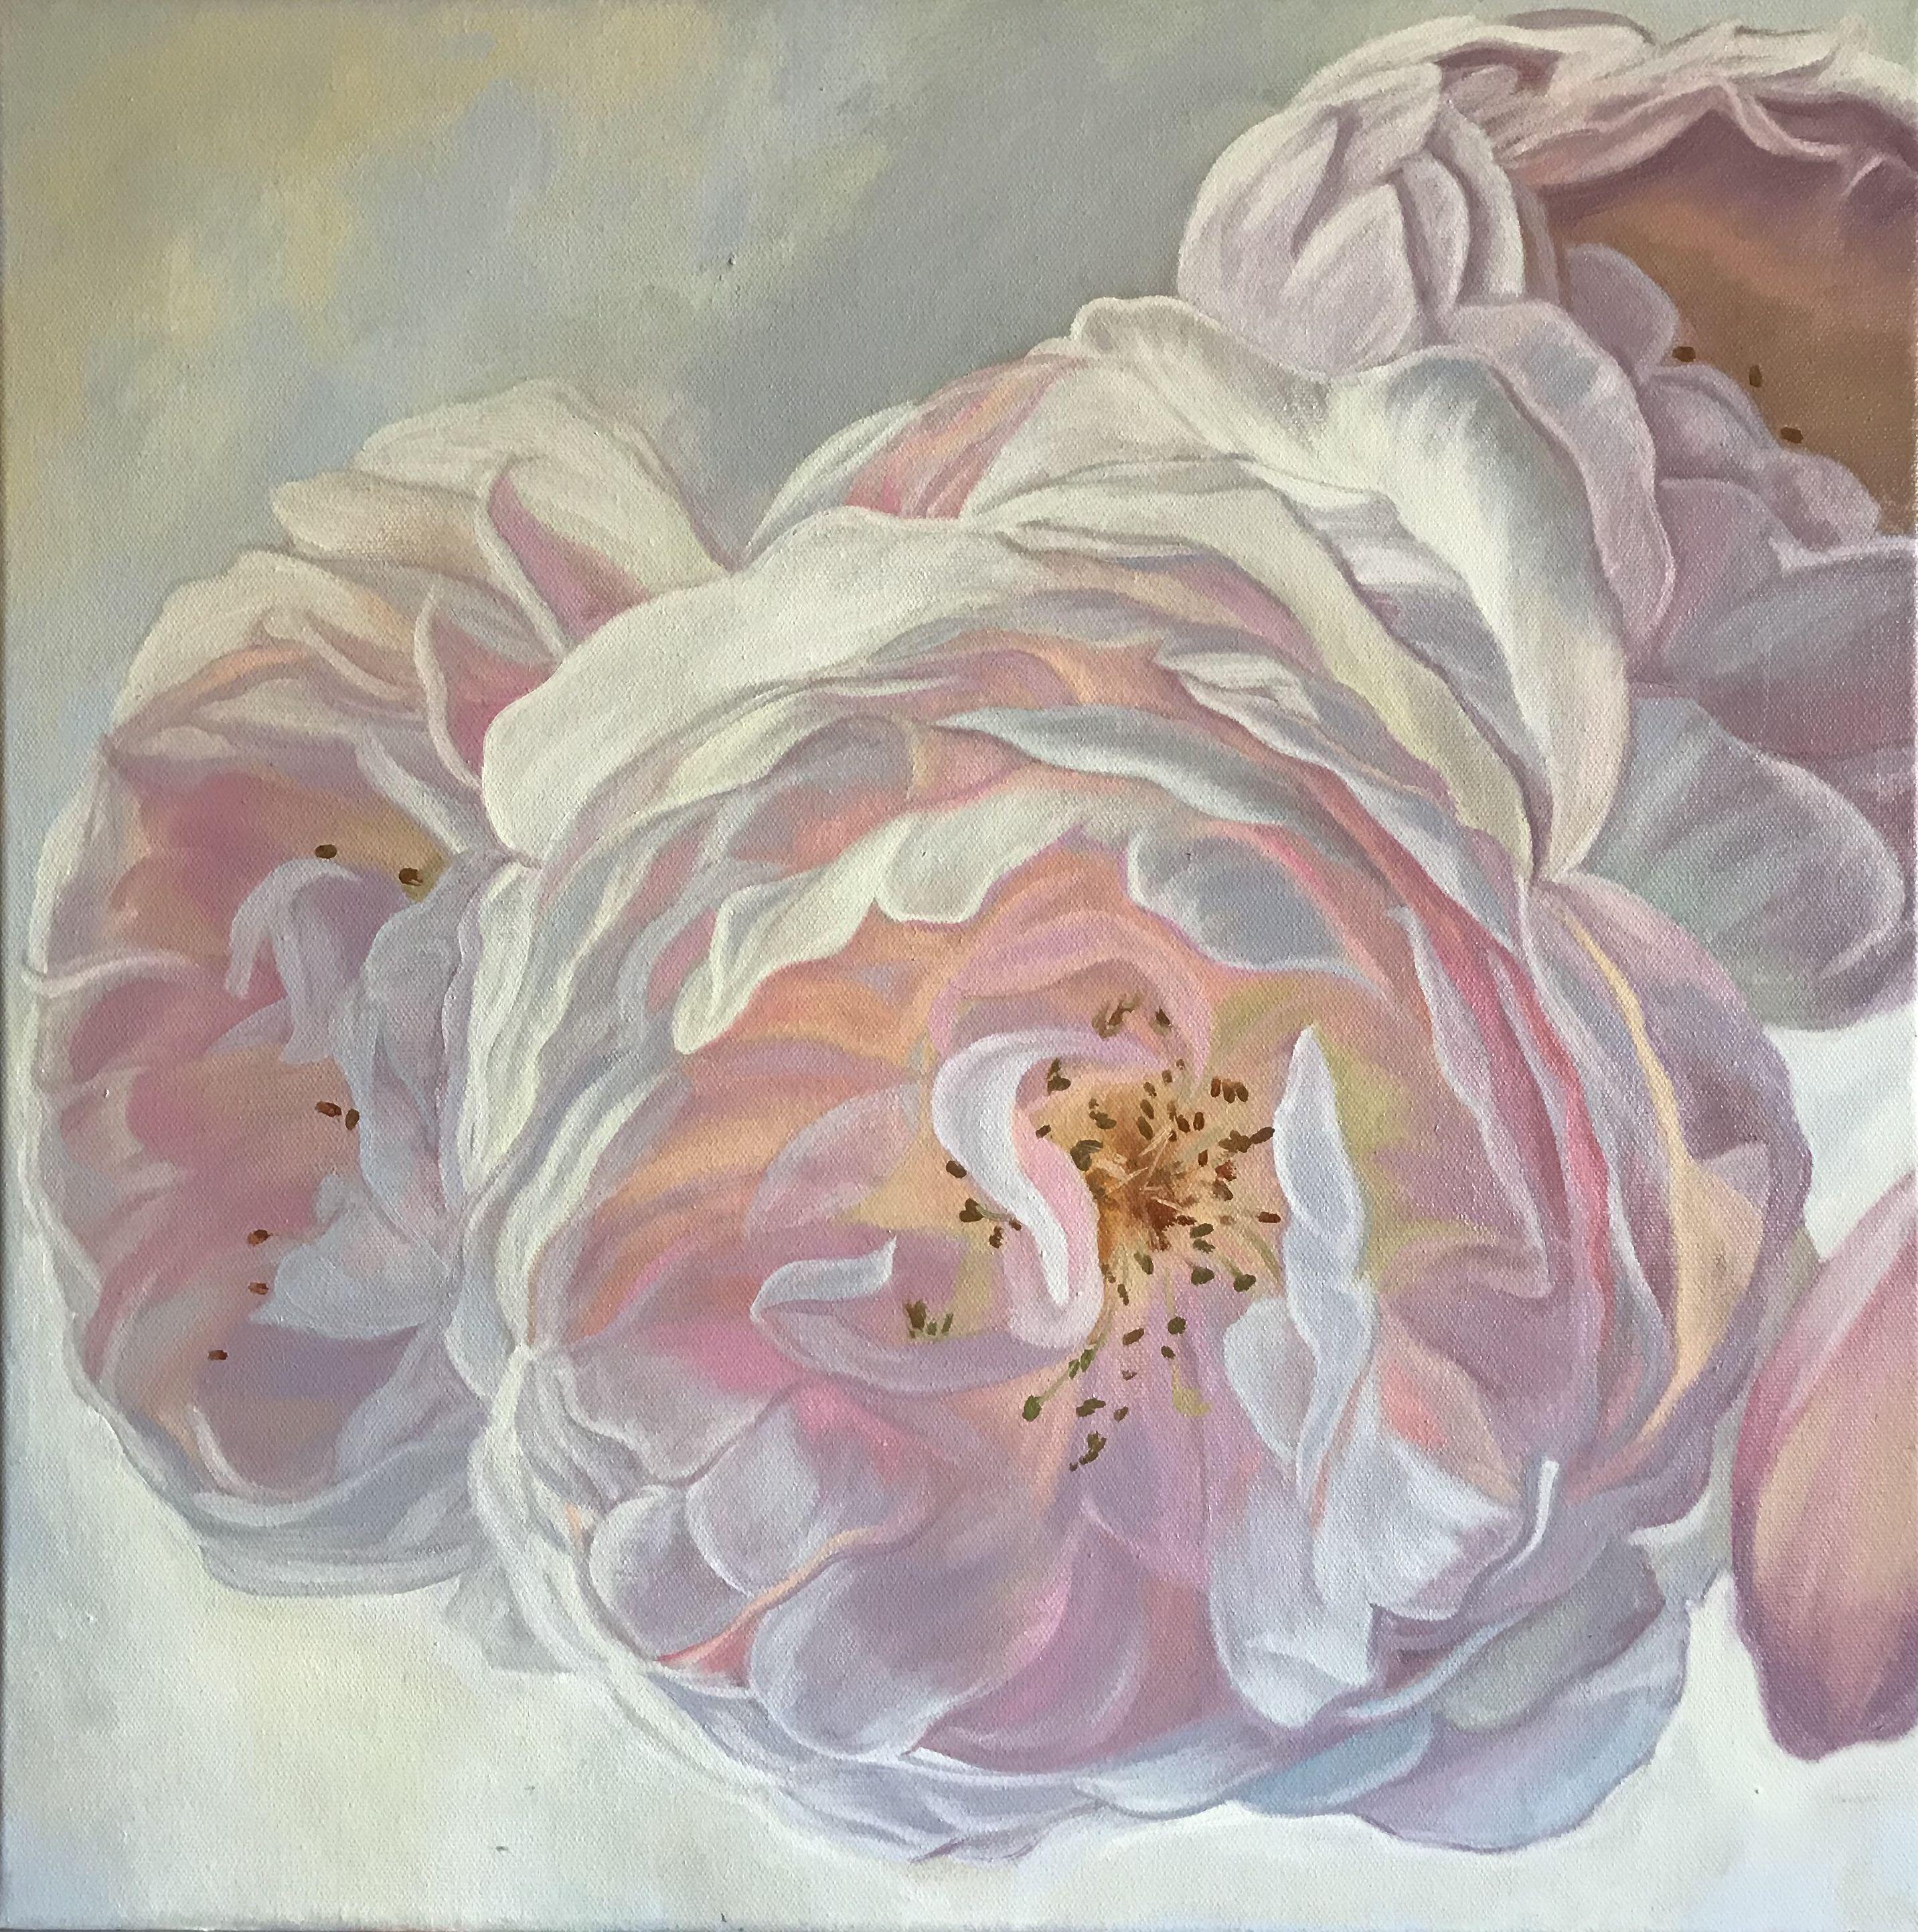 Roses. Oil, acrylic, canvas. 2020 :: Painting :: Realism :: This piece comes with an official certificate of authenticity signed by the artist :: Ready to Hang: Yes :: Signed: Yes :: Signature Location: Podmarkova  :: Canvas :: Diagonal :: Original